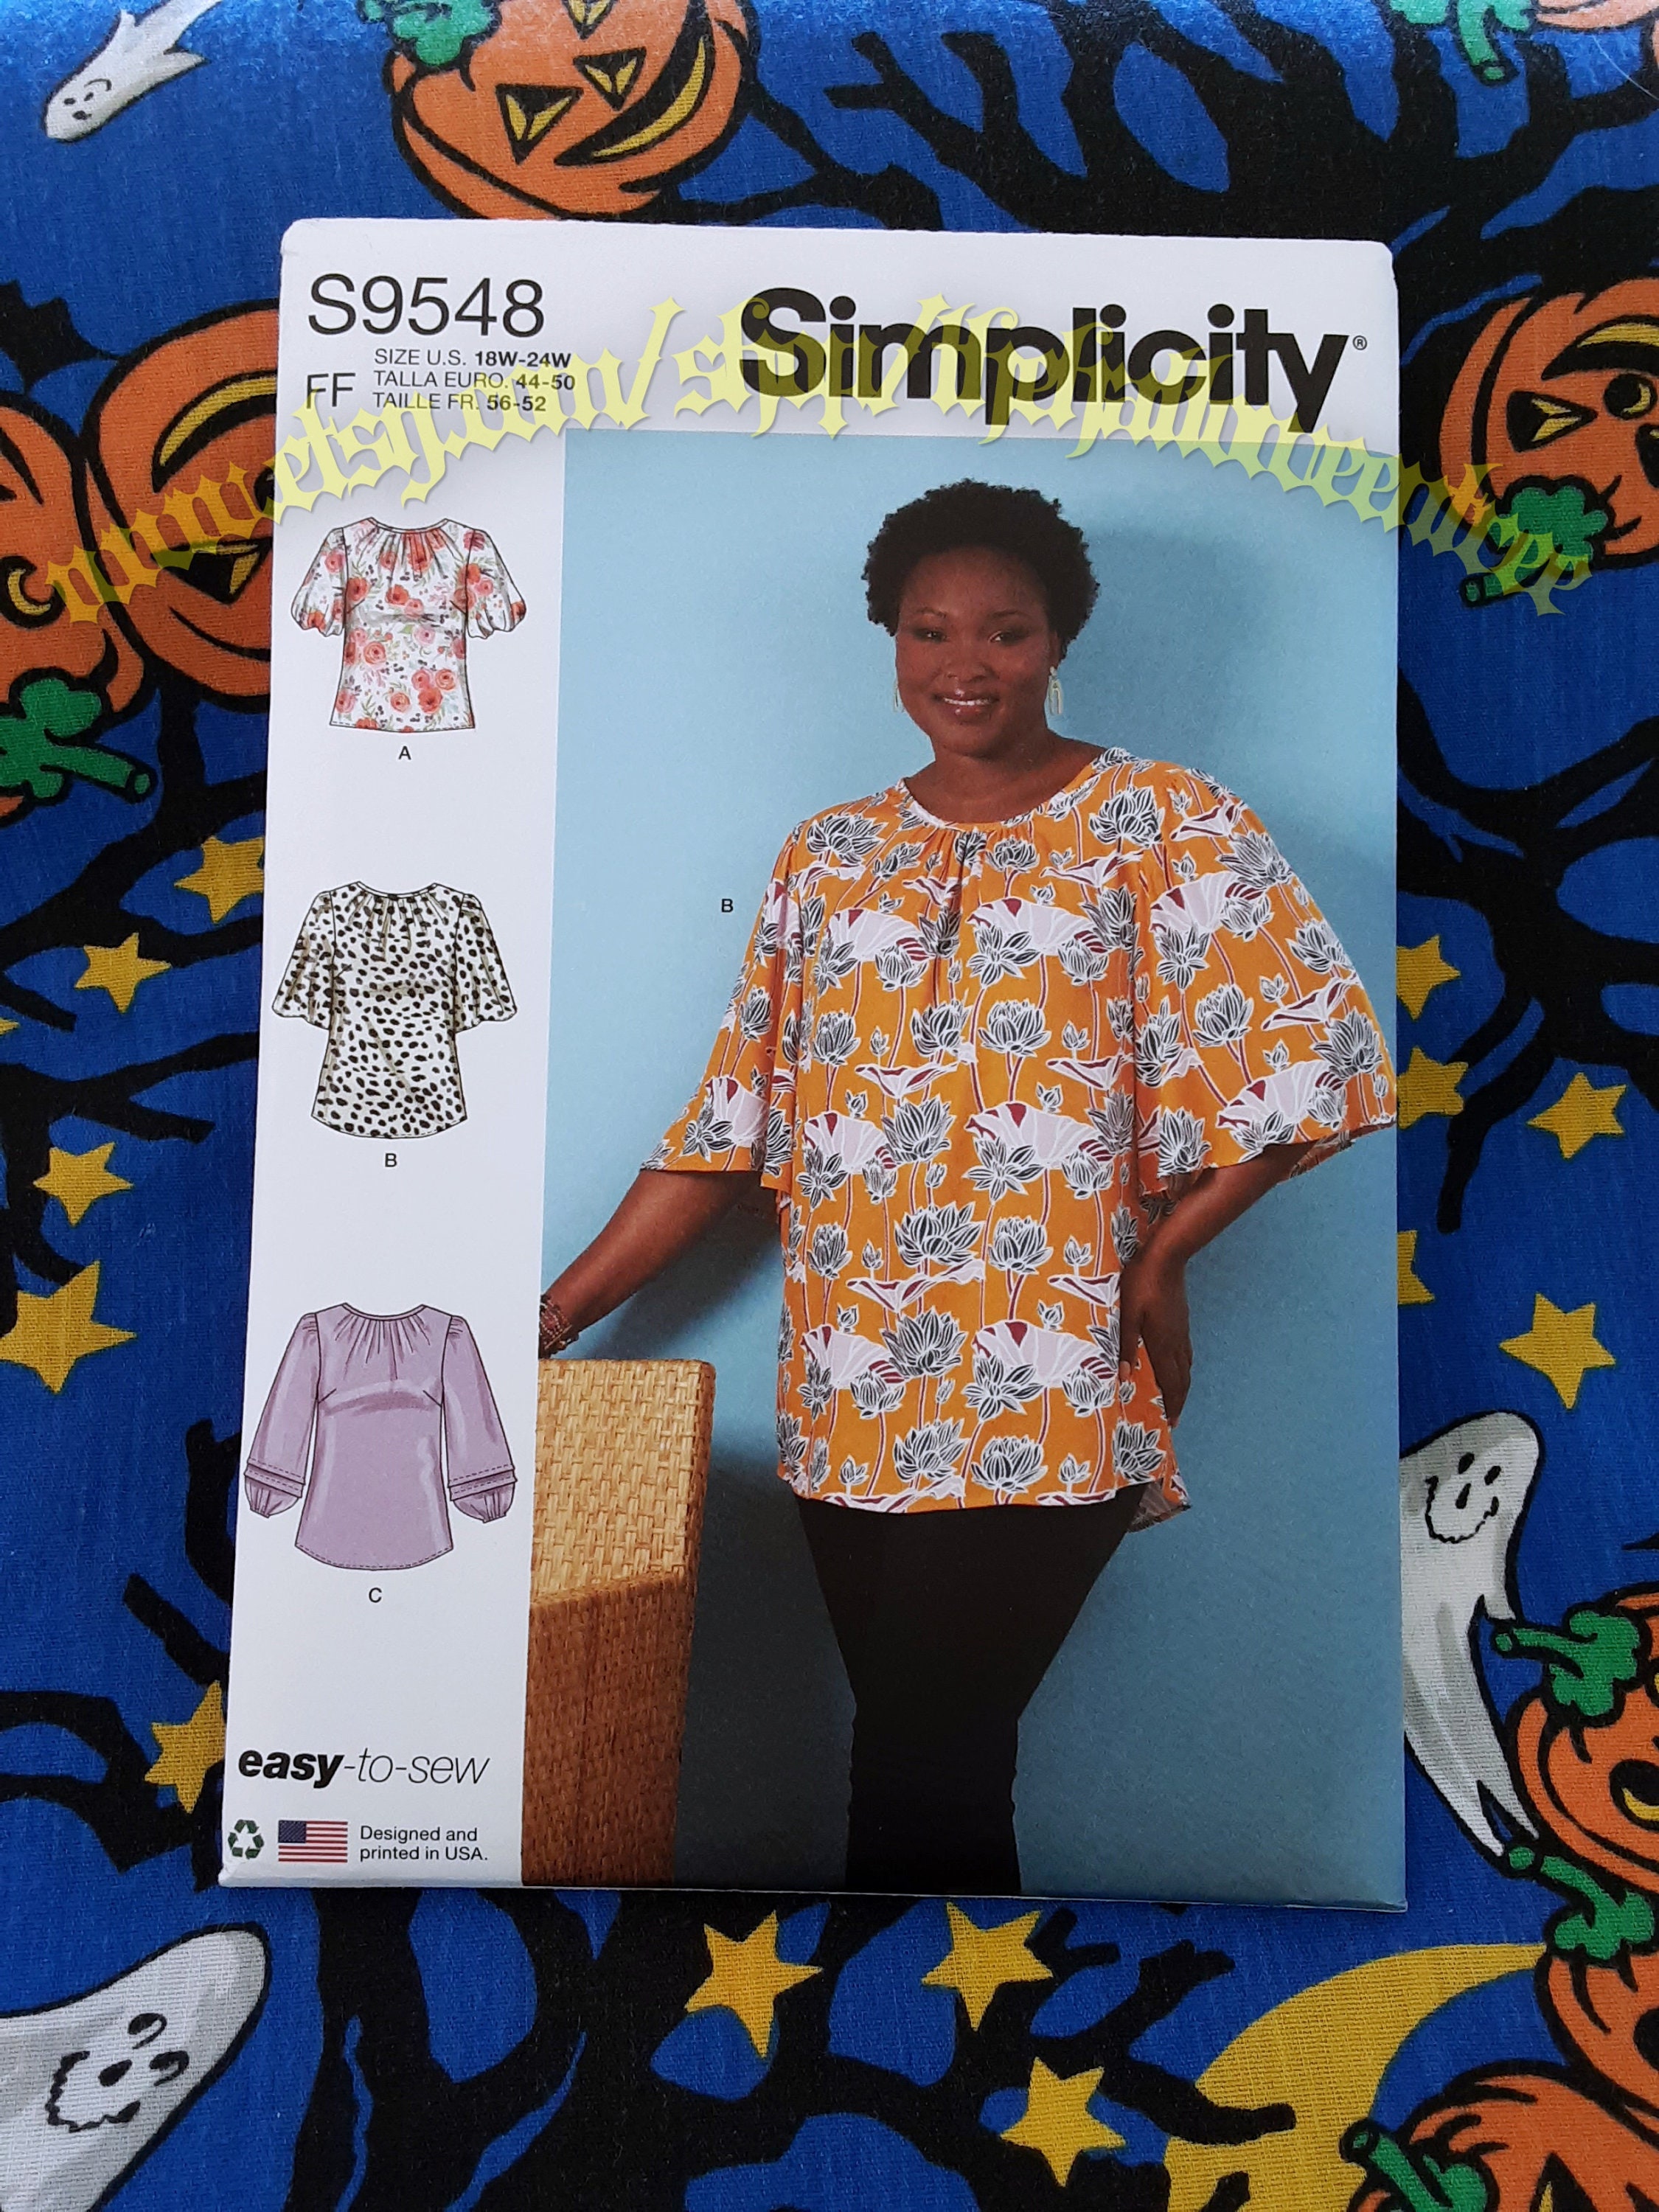 Simplicity 9548 Women's Top and Tunic